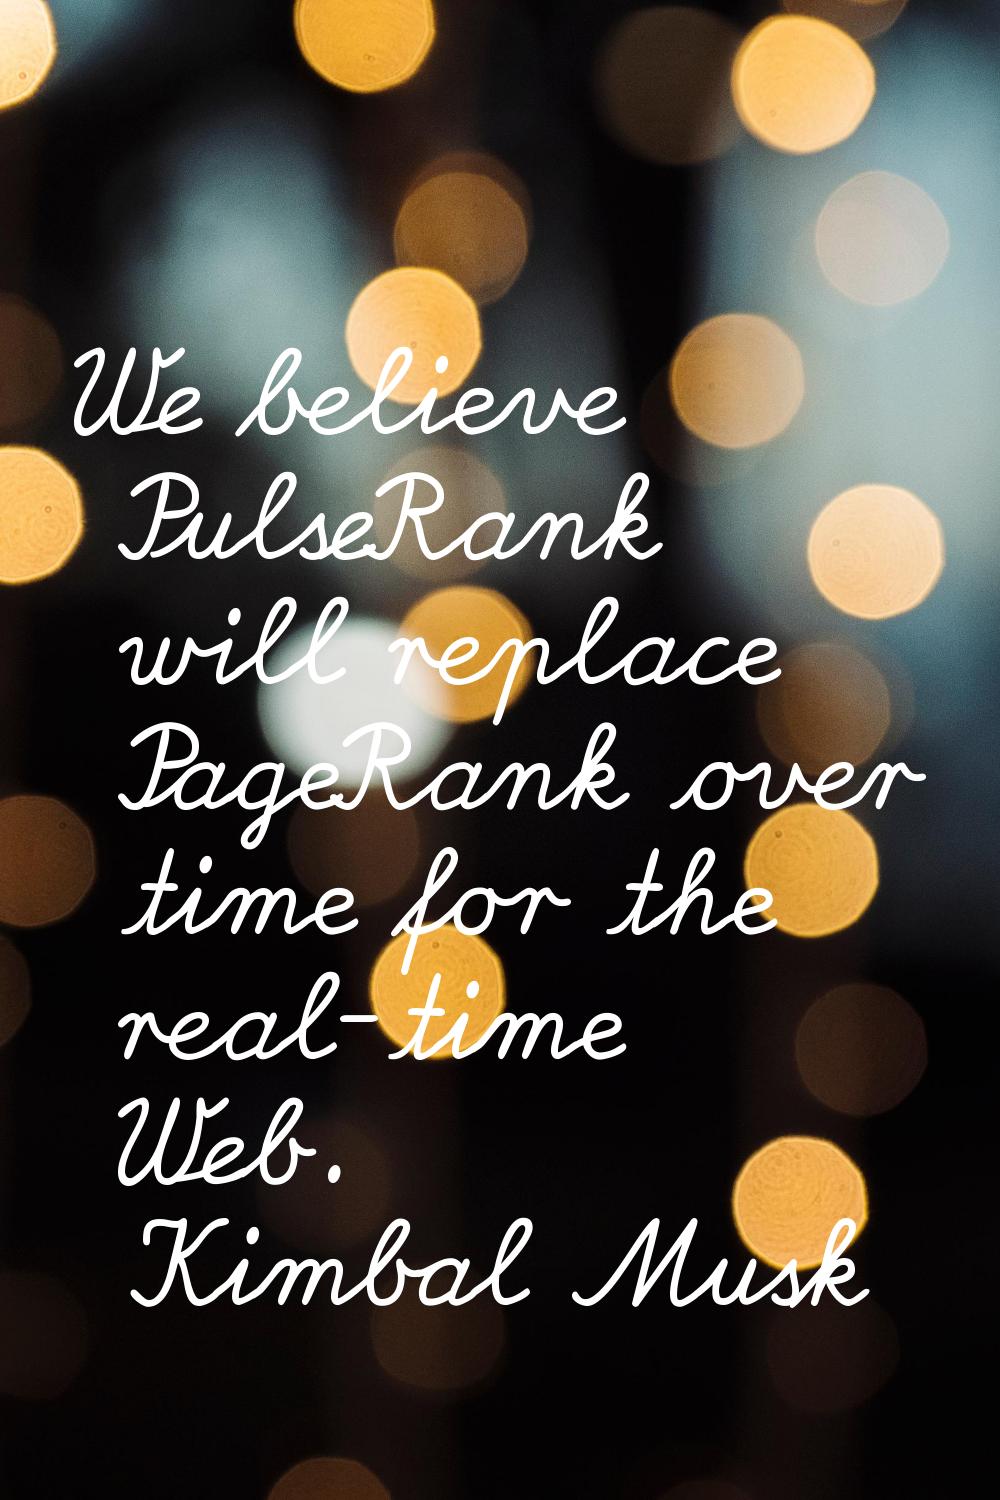 We believe PulseRank will replace PageRank over time for the real-time Web.